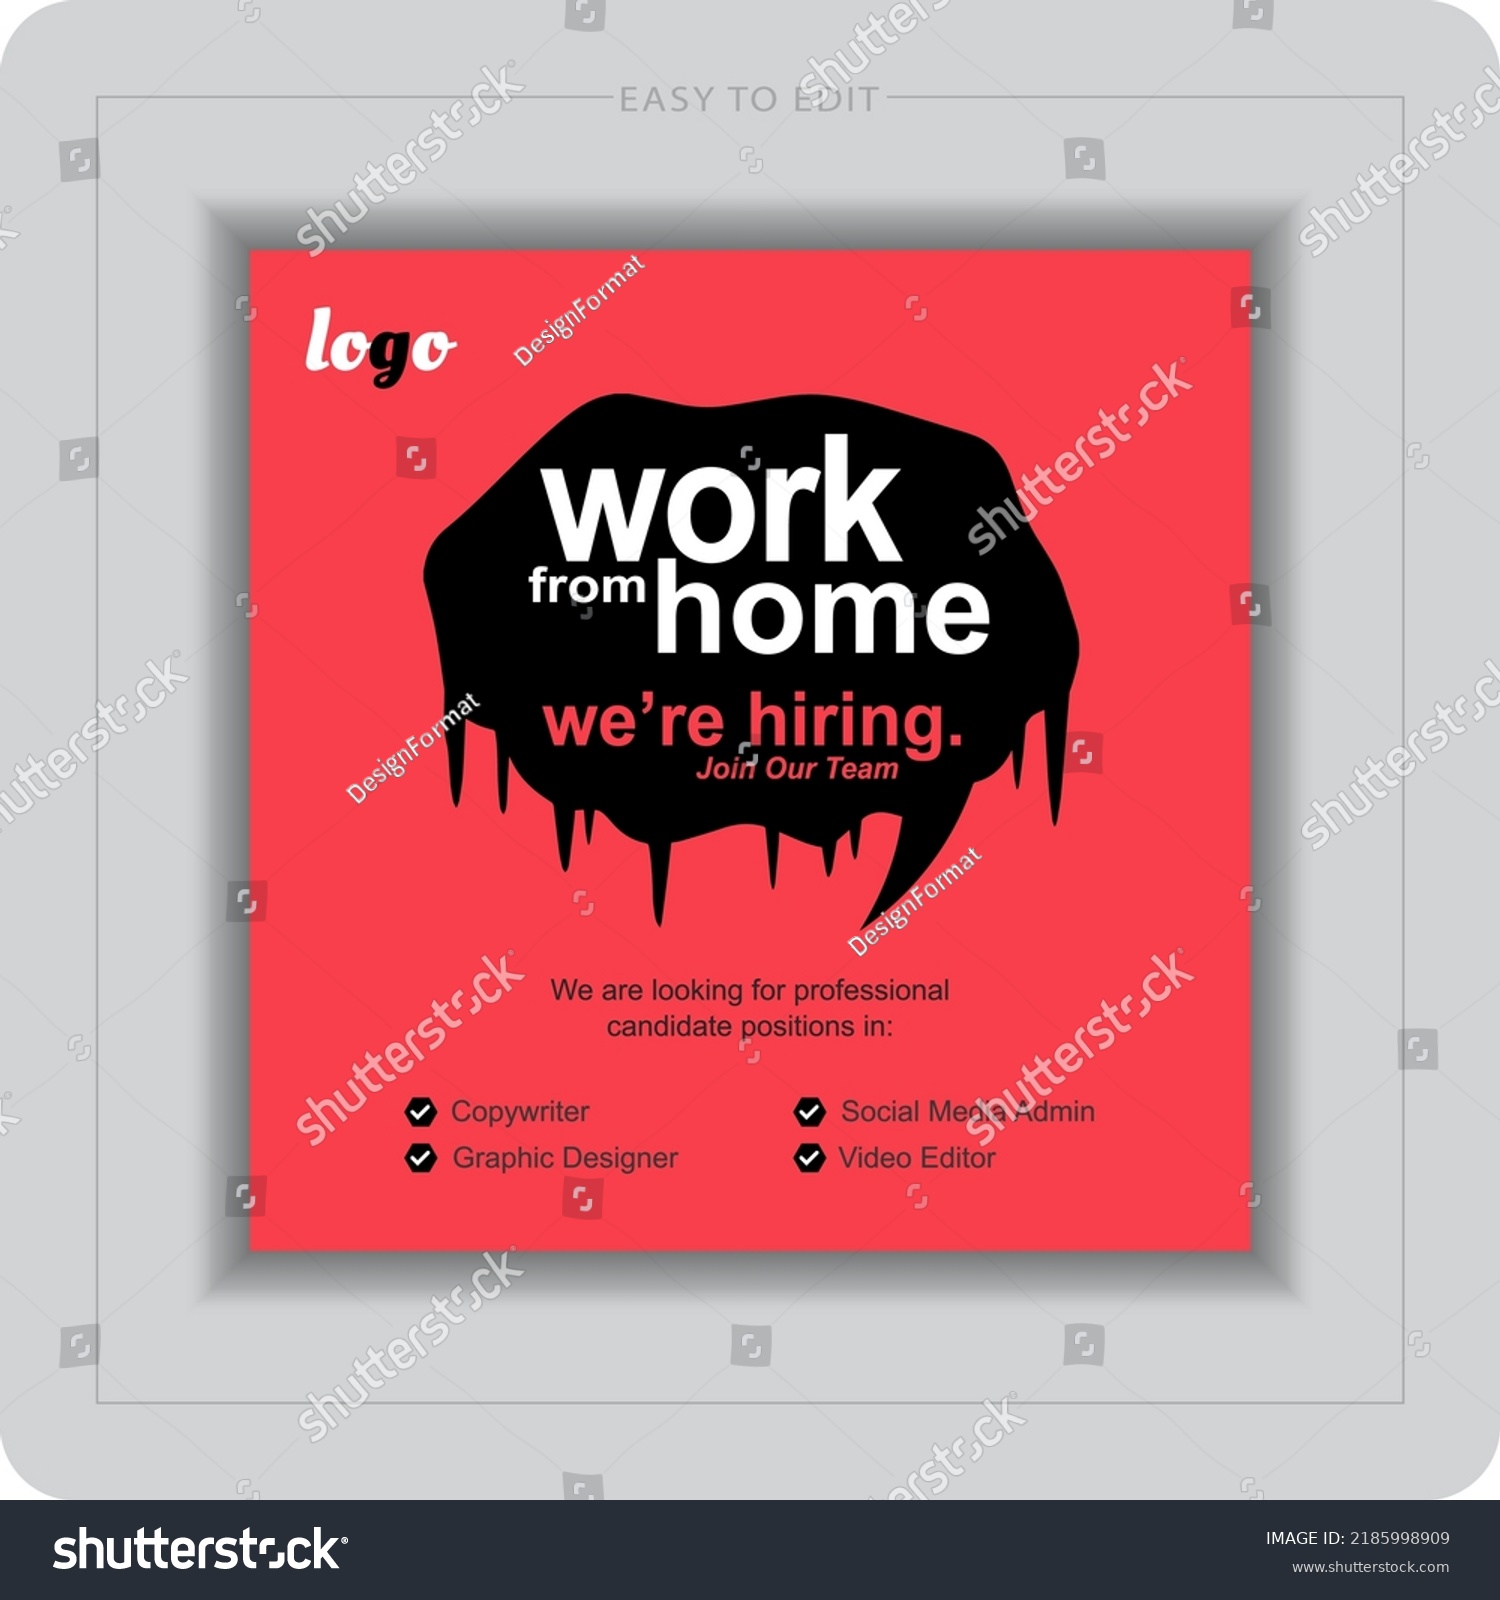 we-are-hiring-poster-free-poster-template-piktochart